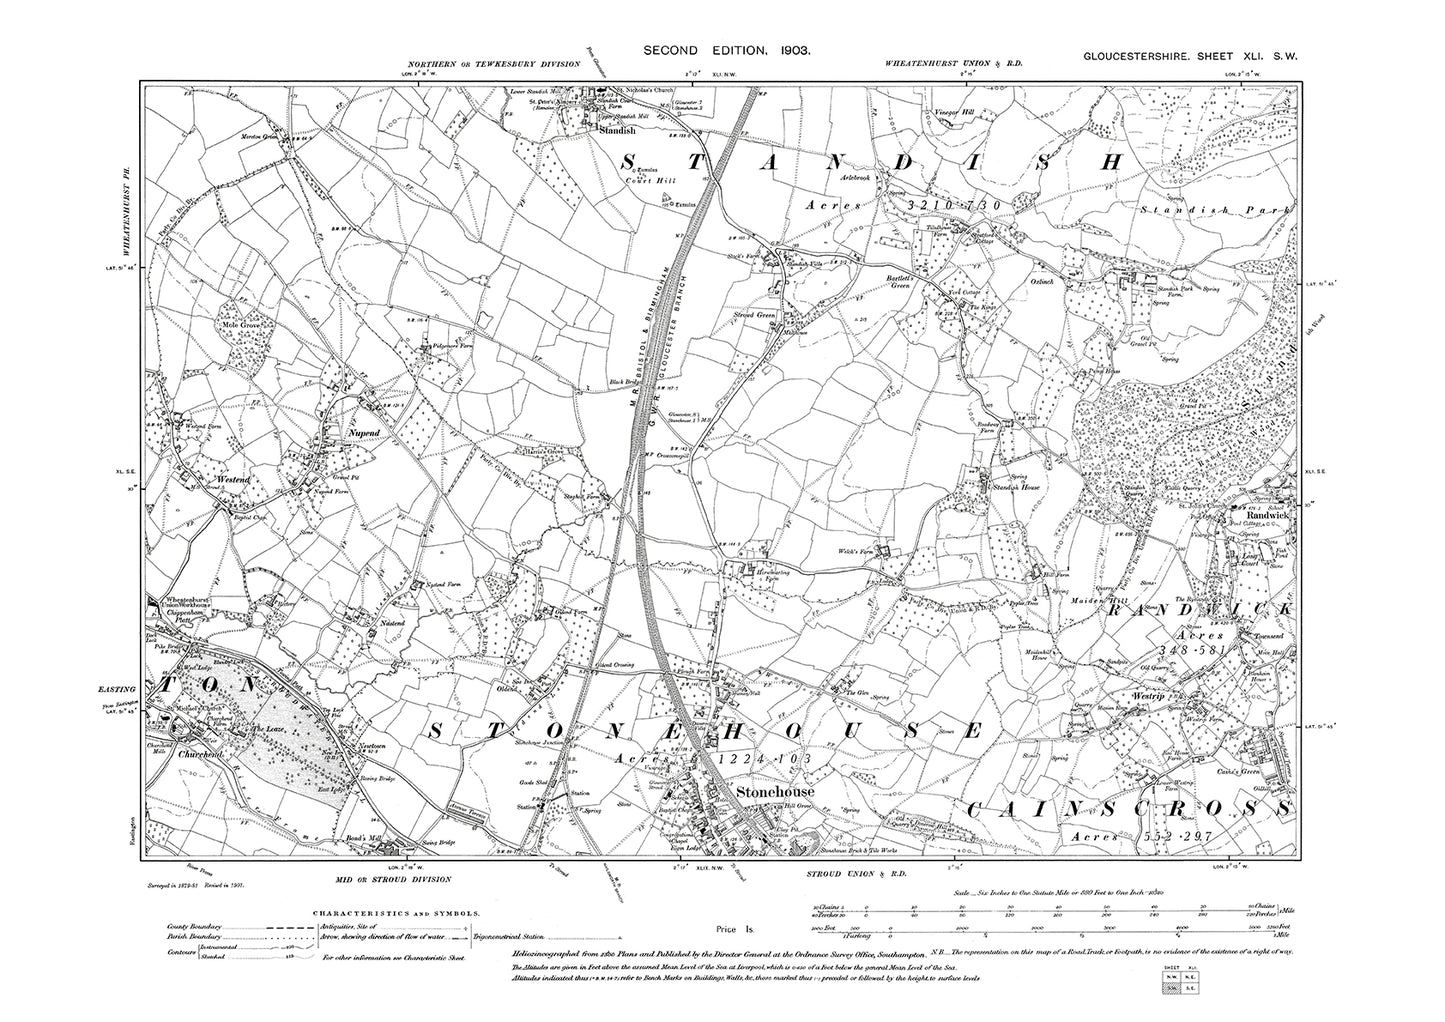 Old OS map dated 1903, showing Eastington, Stonehouse, Standish (south), Nupend, Randwick in Gloucestershire - 41SW